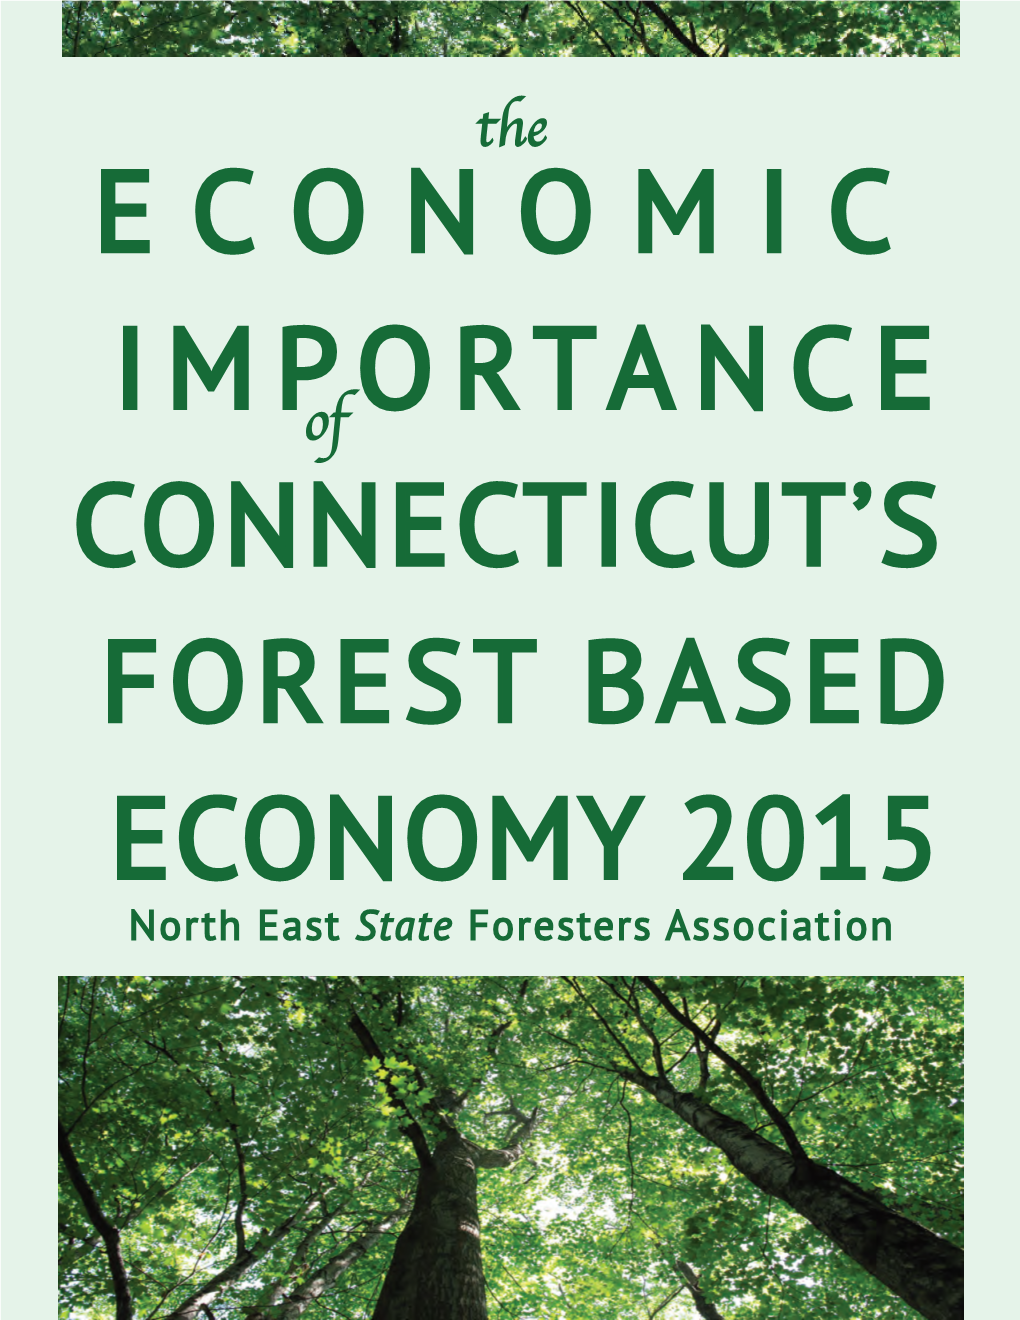 Of CONNECTICUT’S FOREST BASED ECONOMY 2015 North East State Foresters Association I